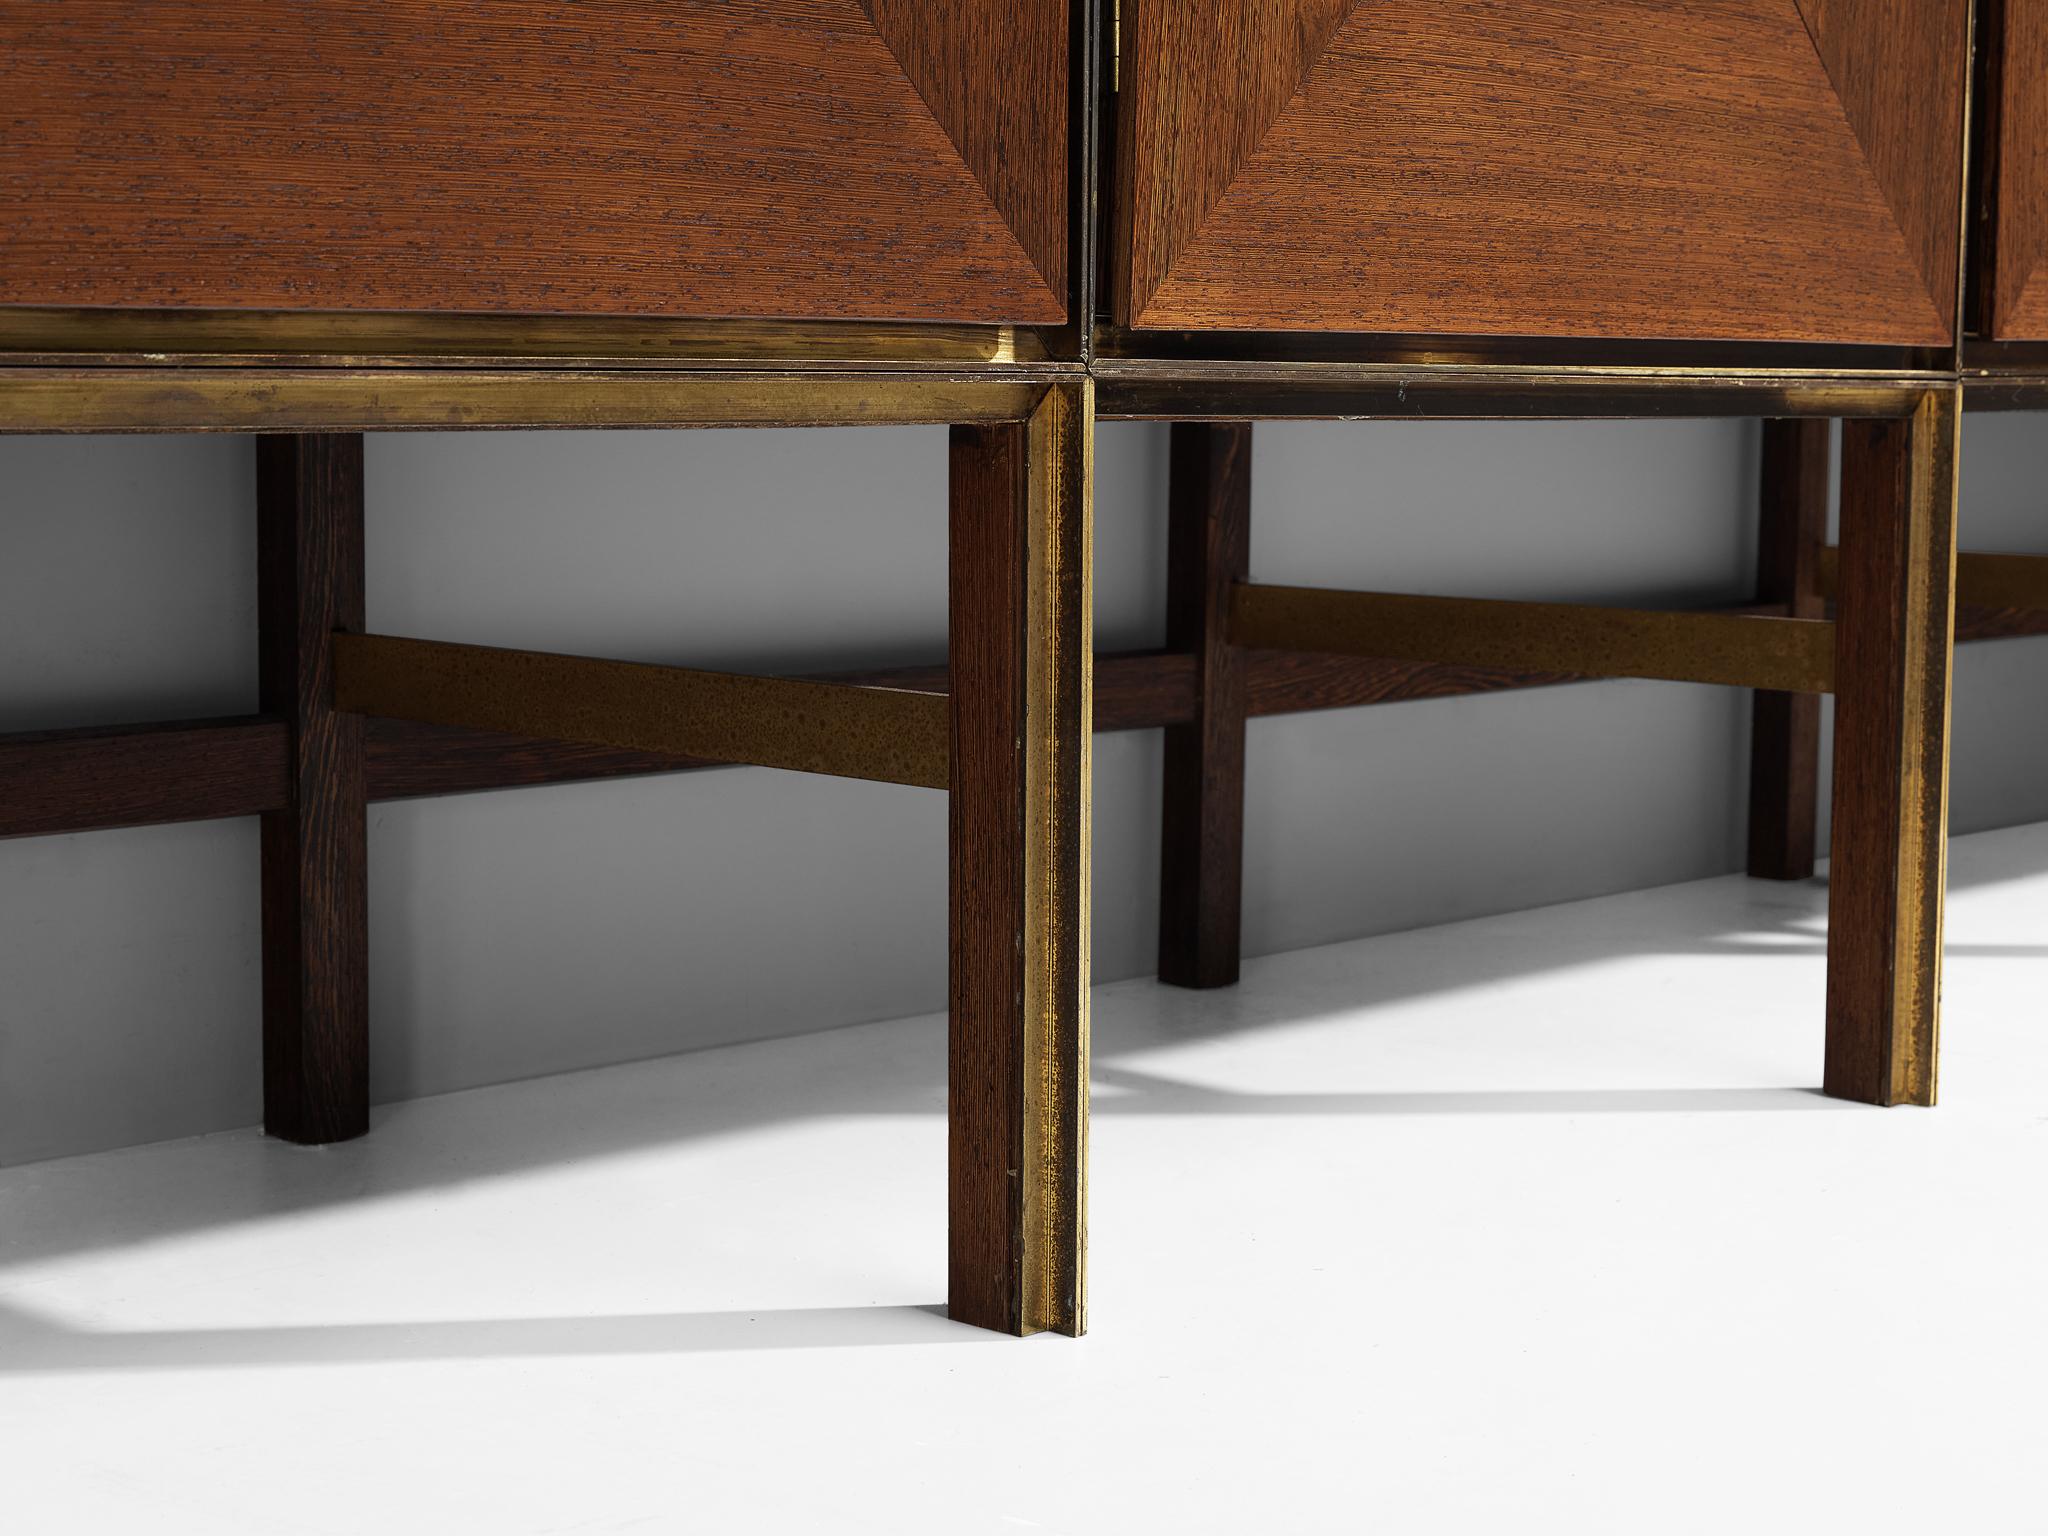 Late 20th Century Exceptional Flemish Sideboard in Wenge and Ceramics